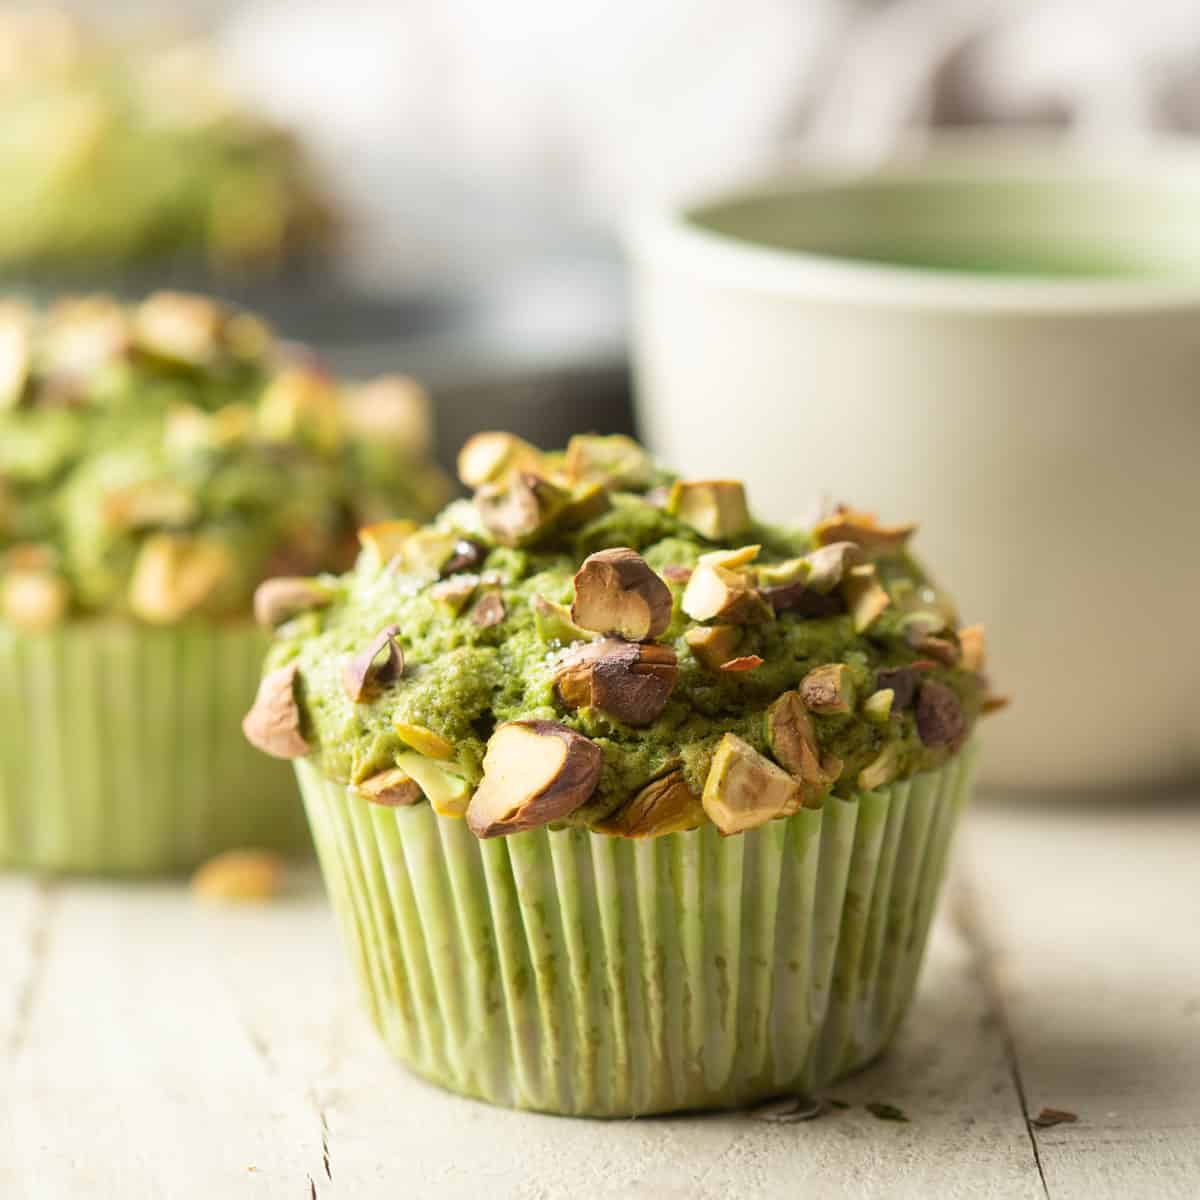 Matcha green tea pistachio muffins, made with organic matcha, spongy, fluffy and baked with love in Dubai. A great gift for a family or a treat for a special someone to enjoy over and over. Delivered to you across Dubai and the UAE.